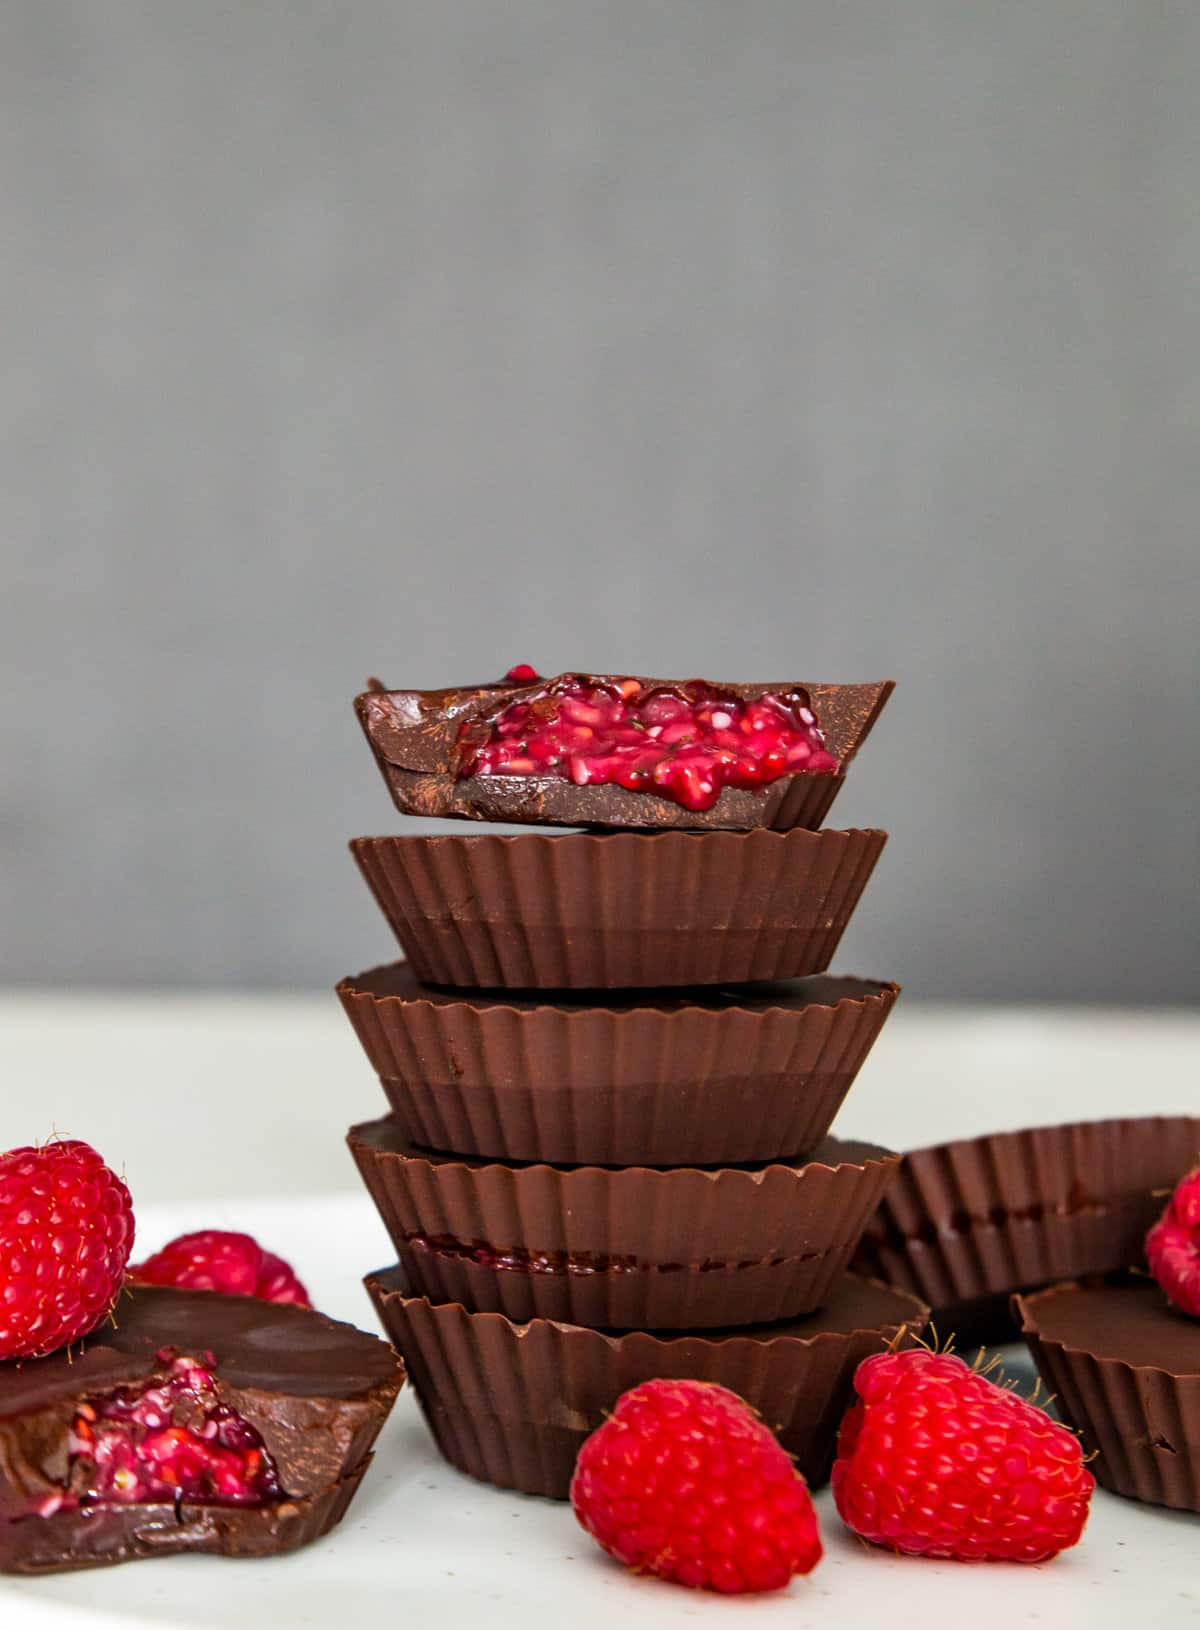 A stack of five chocolates and the top one has a bite out of it with a raspberry filling spilling out.